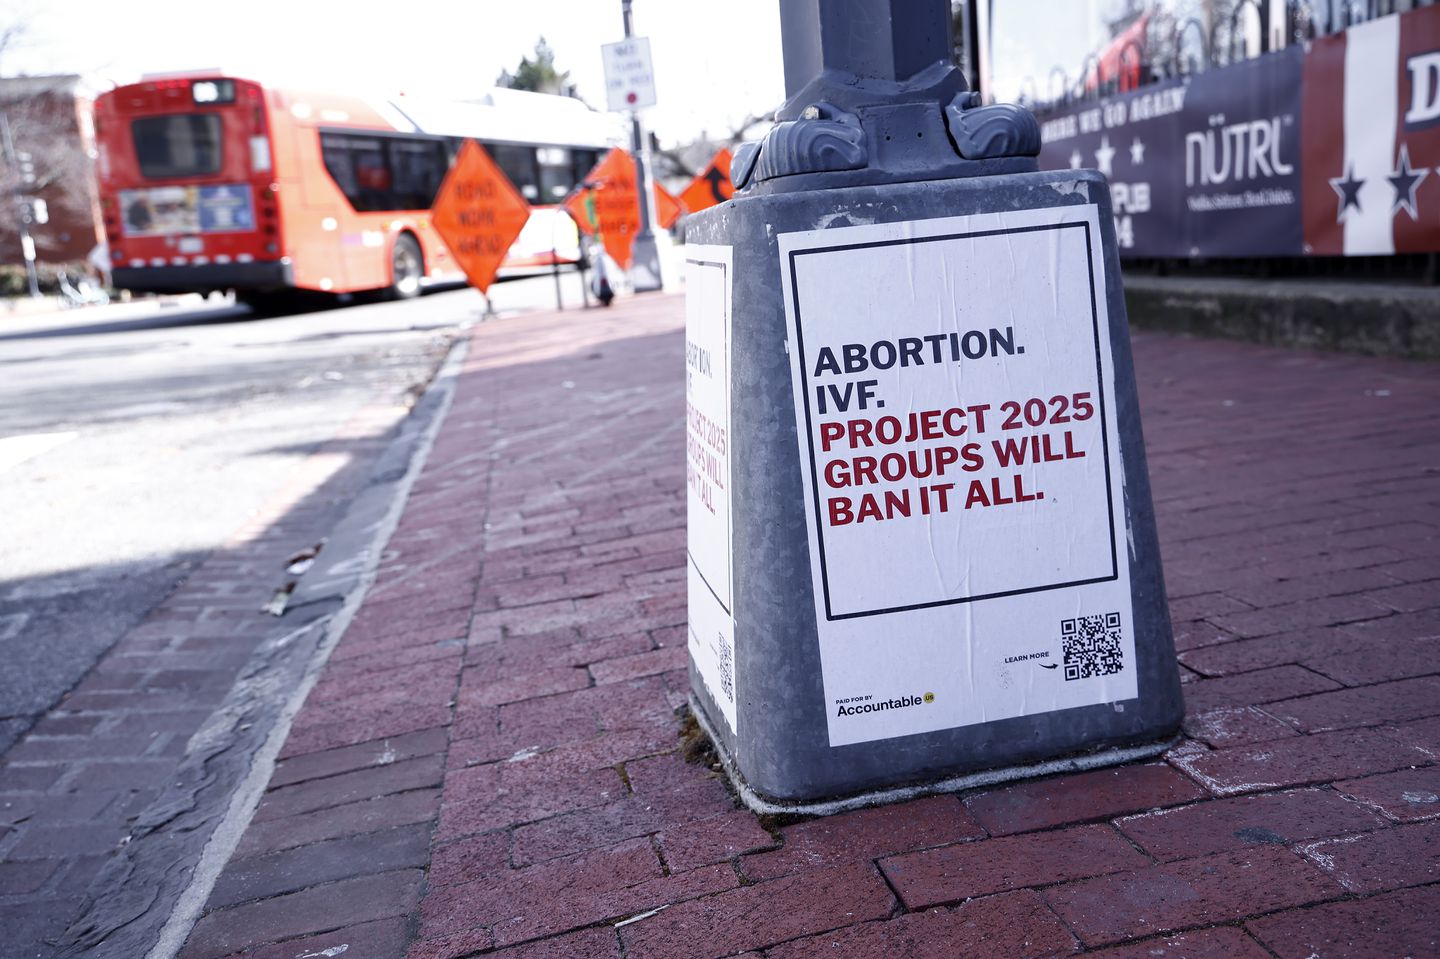 Government watchdog Accountable.US launched its "Expose Project 2025" campaign on the streets of Washington, D.C., in March.